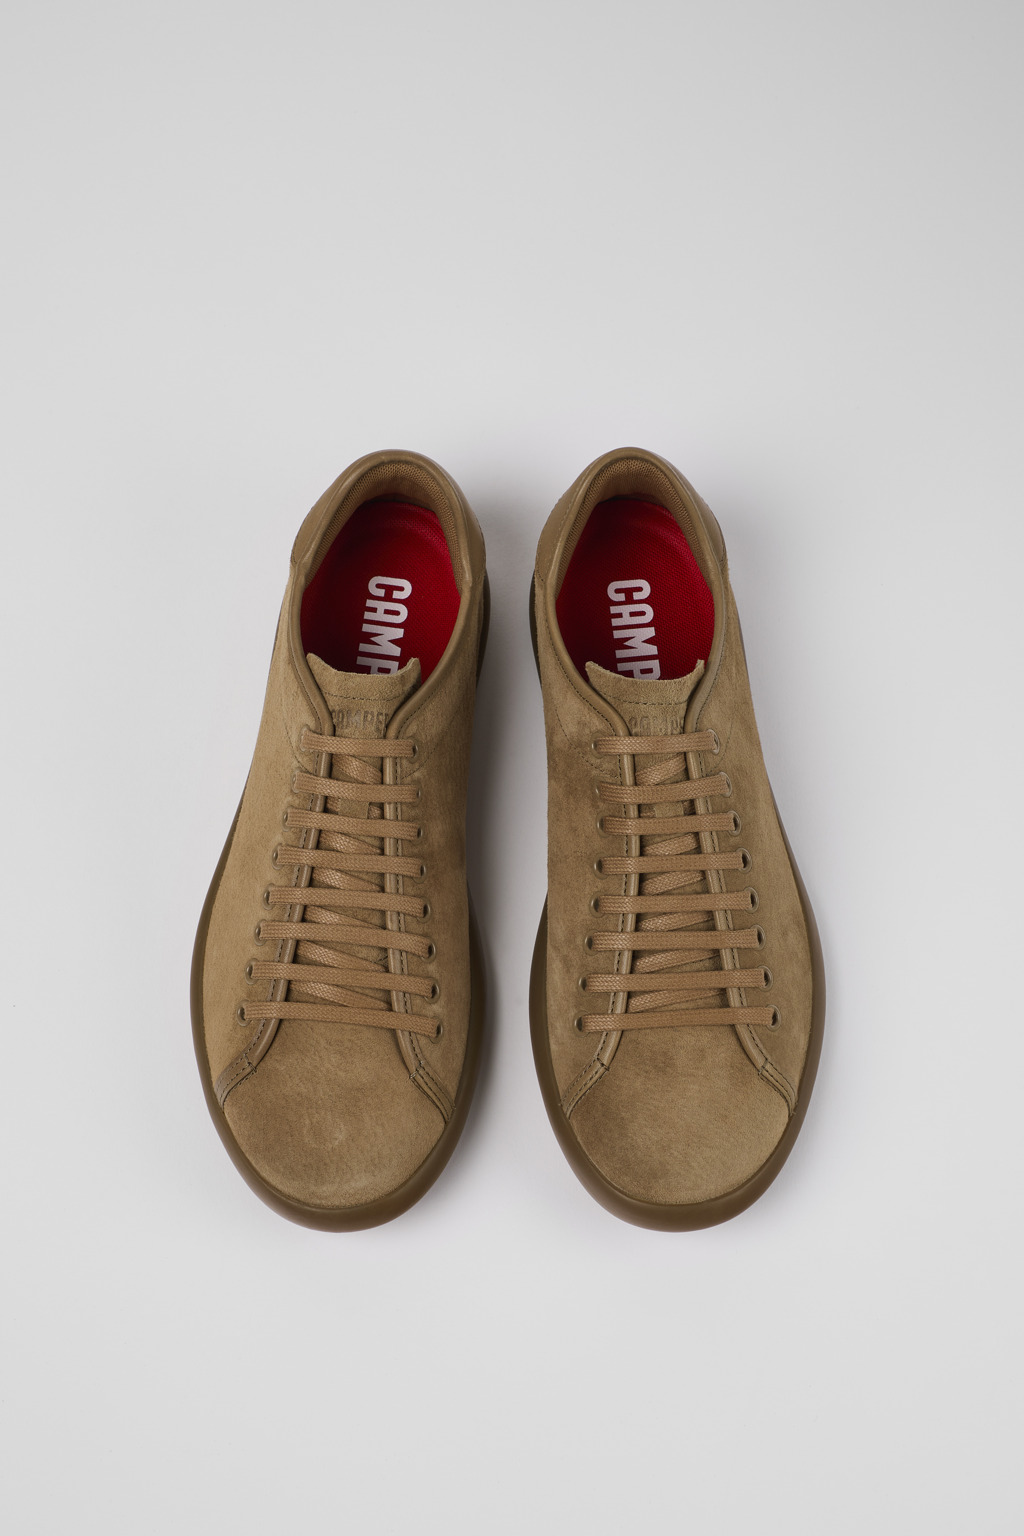 Pelotas Brown Sneakers for Men - Fall/Winter collection - Camper USA